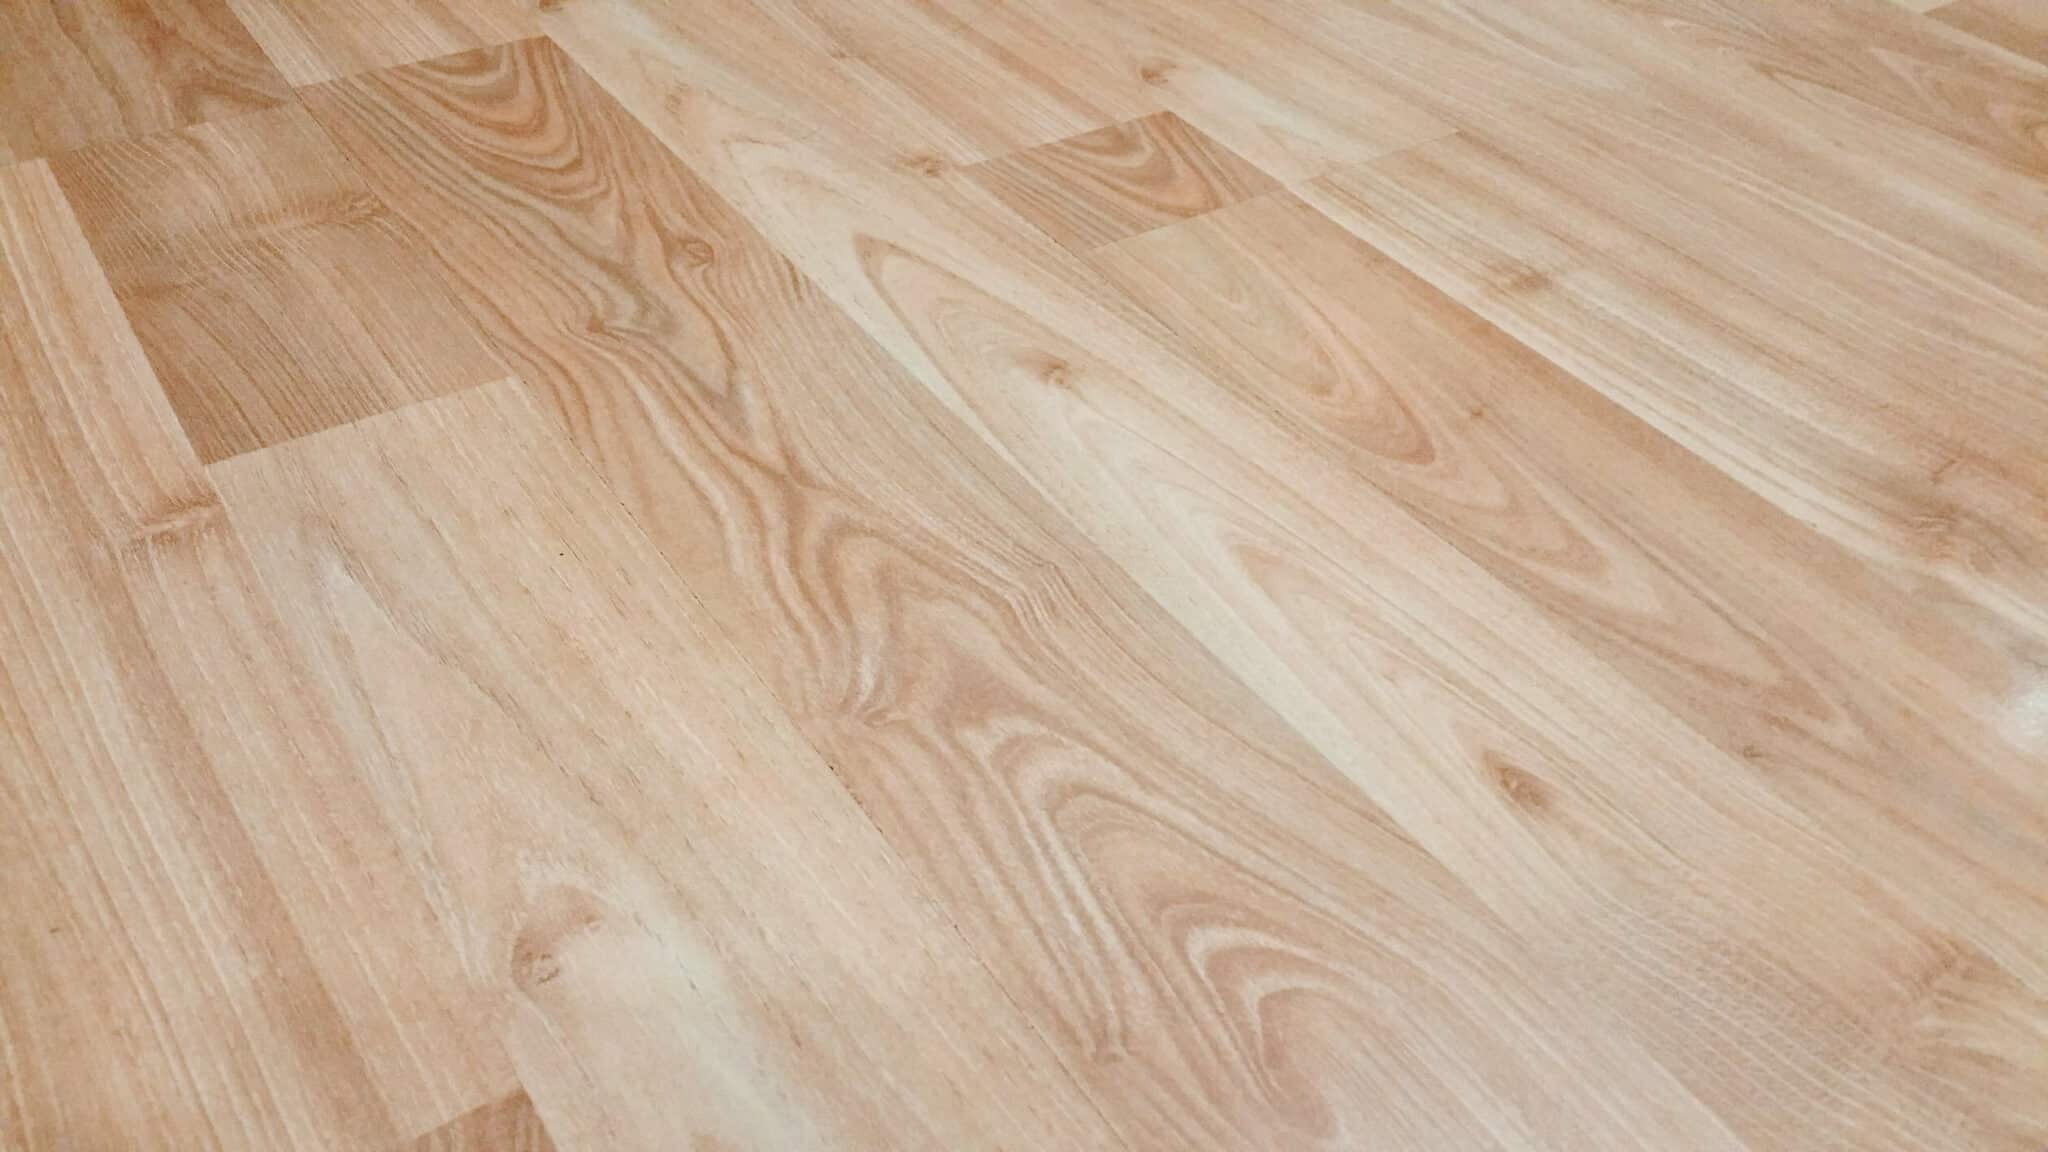 How To Keep Your Hardwood Flooring Clean In 3 Steps!